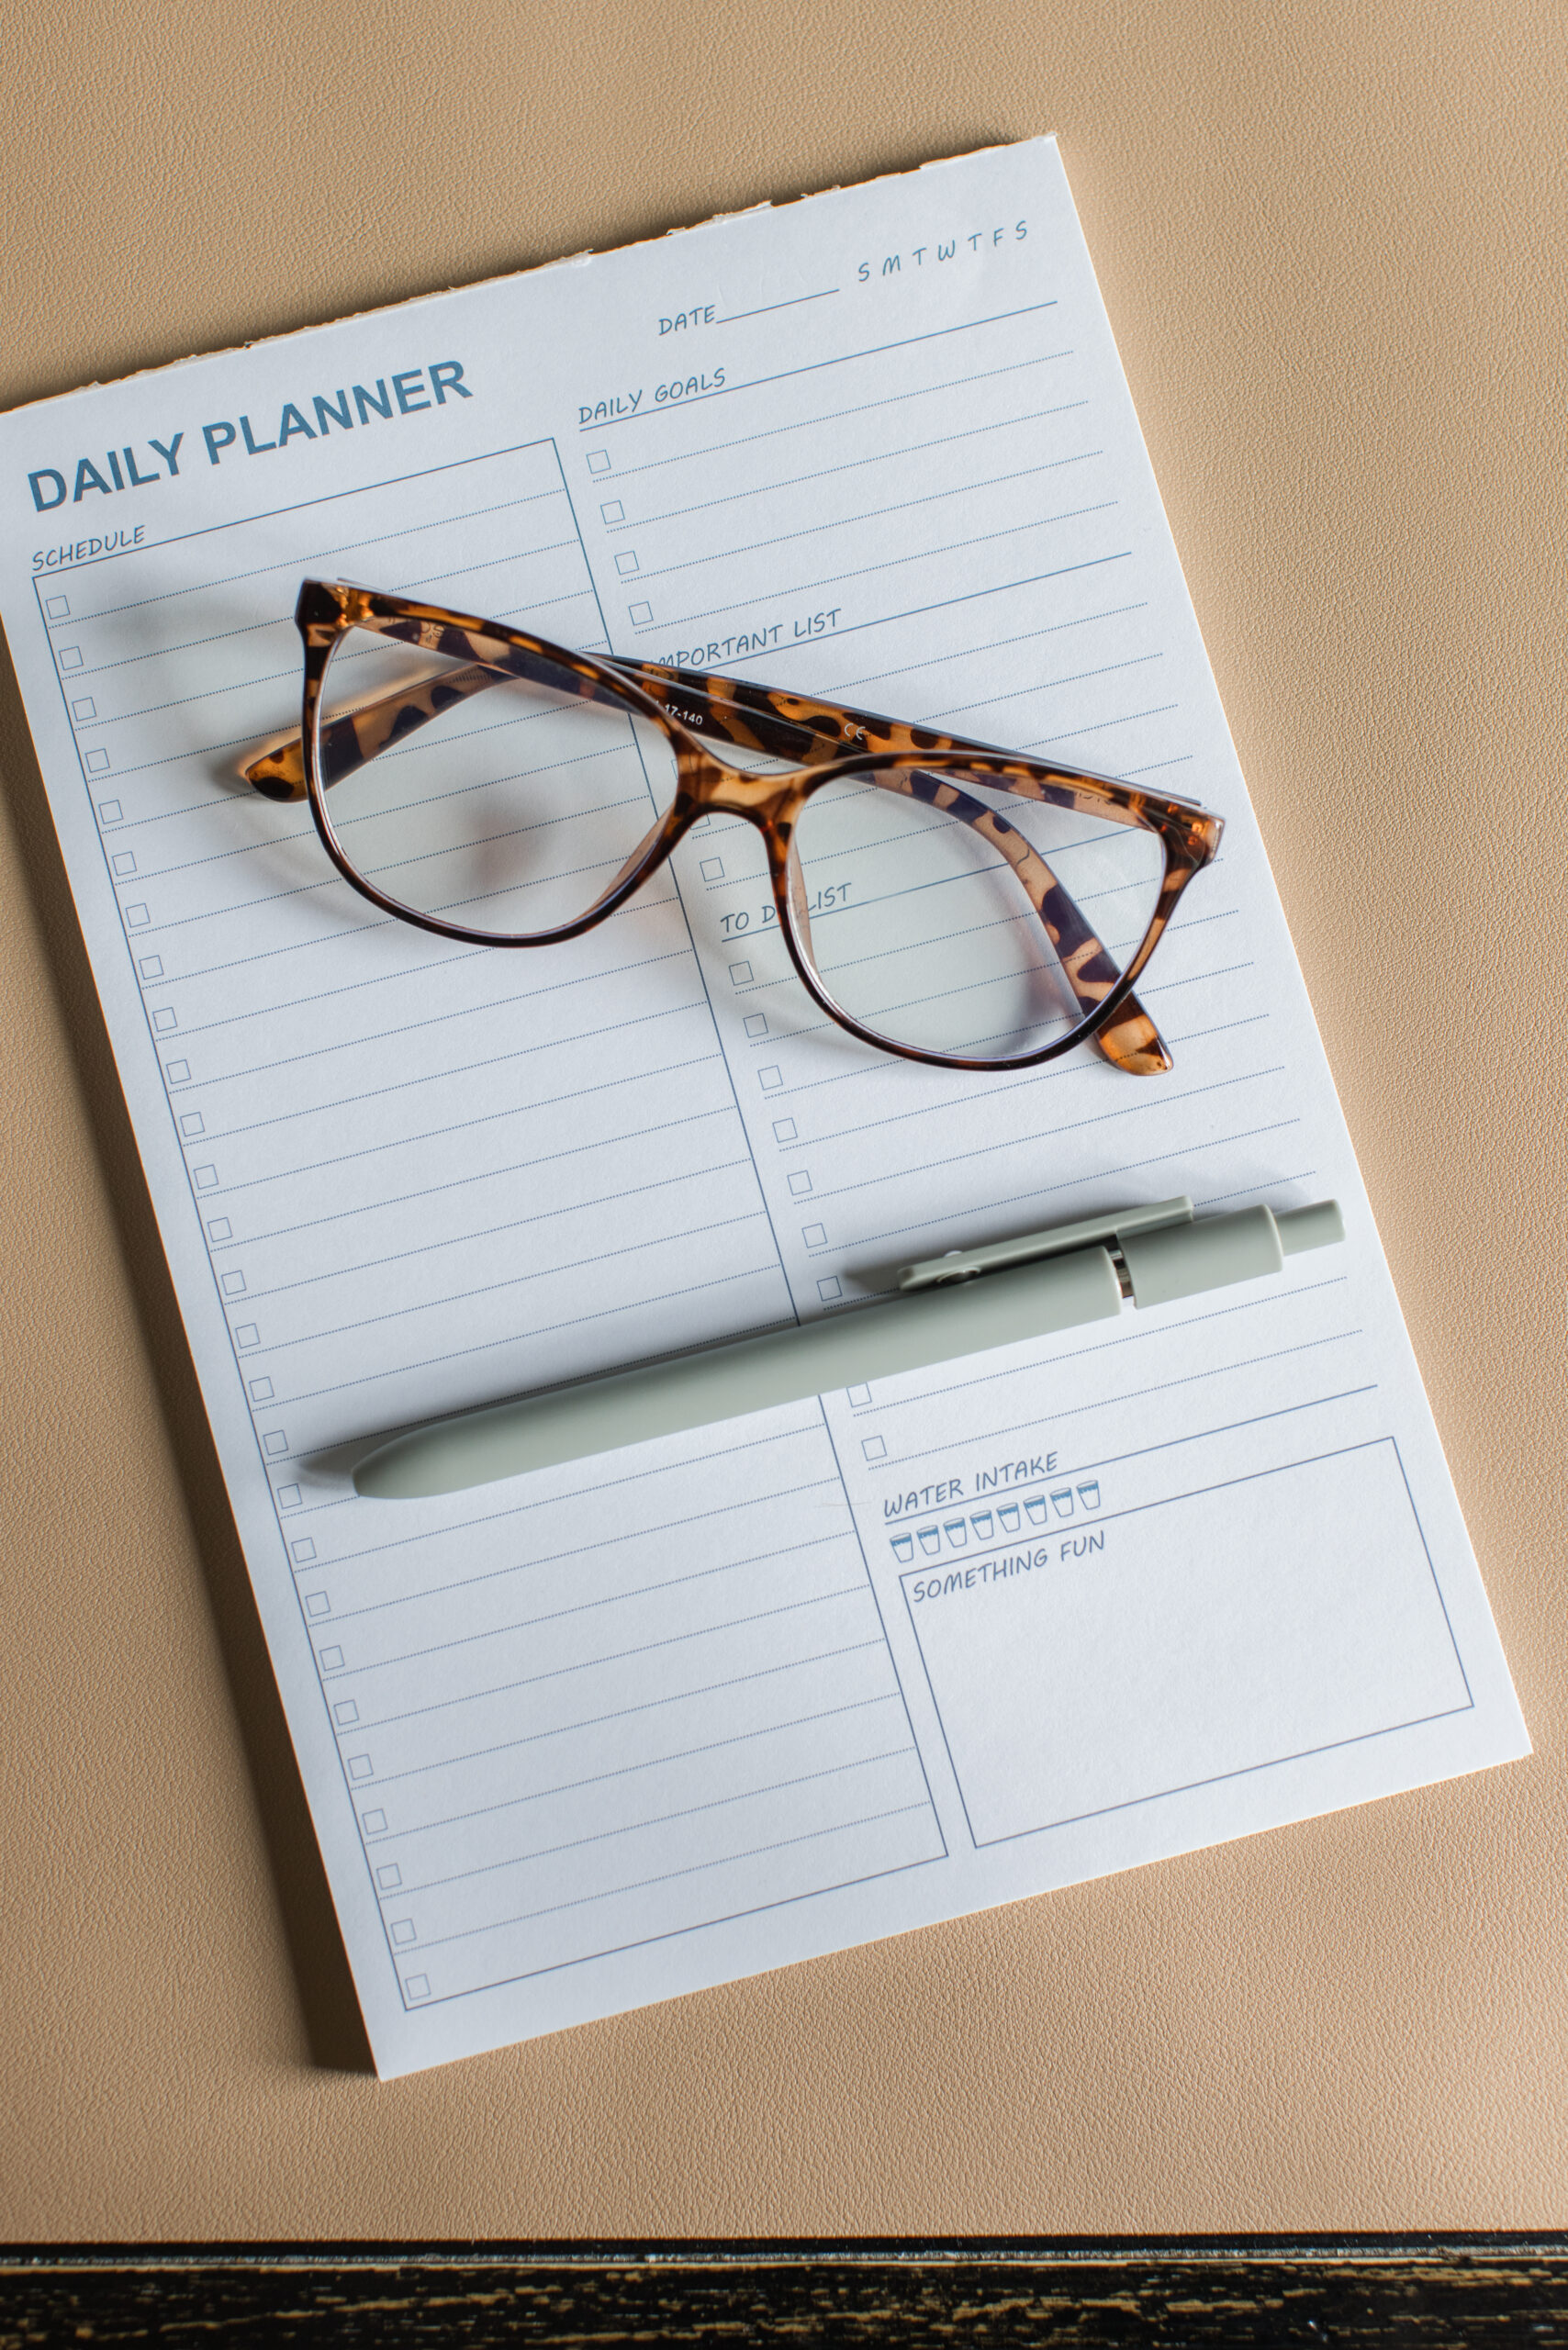 setting and achieving goals this new year home office organization | #setting #achieving #goals #home #homeoffice #organization #desktop #accessories #notebook #pens #notepad #planner #glasses #desk #officespace